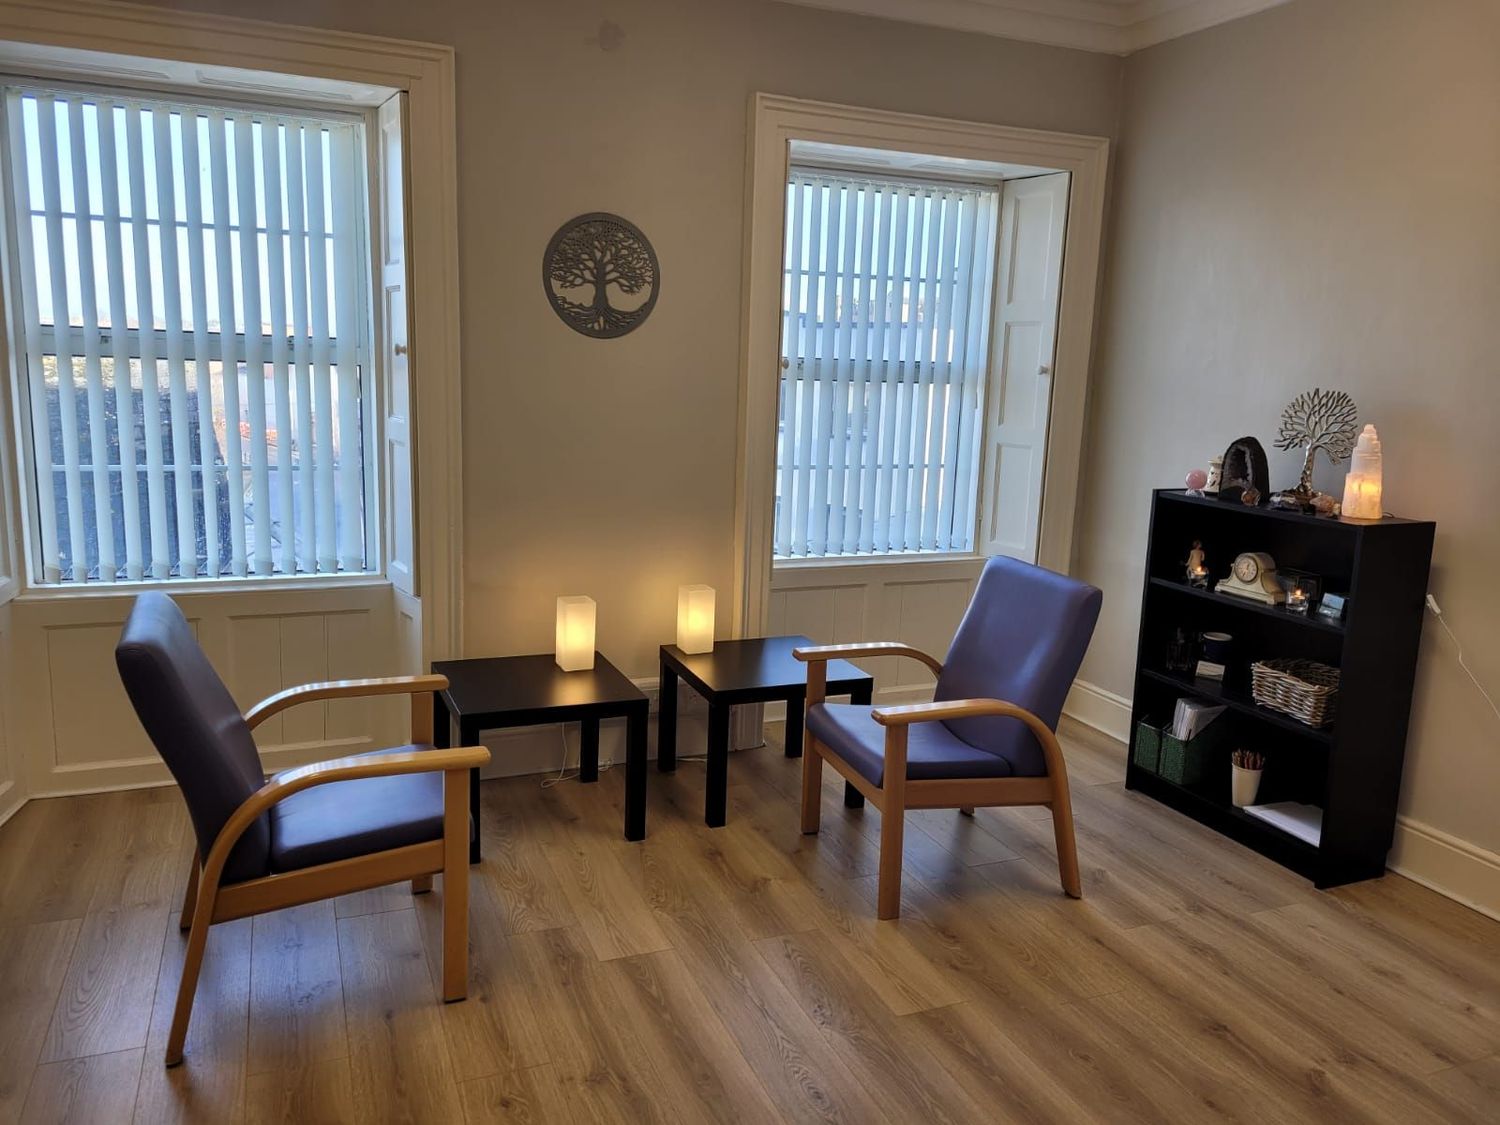 Gallery Photo of Inner Wisdom's non-judgemental, safe & secure environment to speak openly 